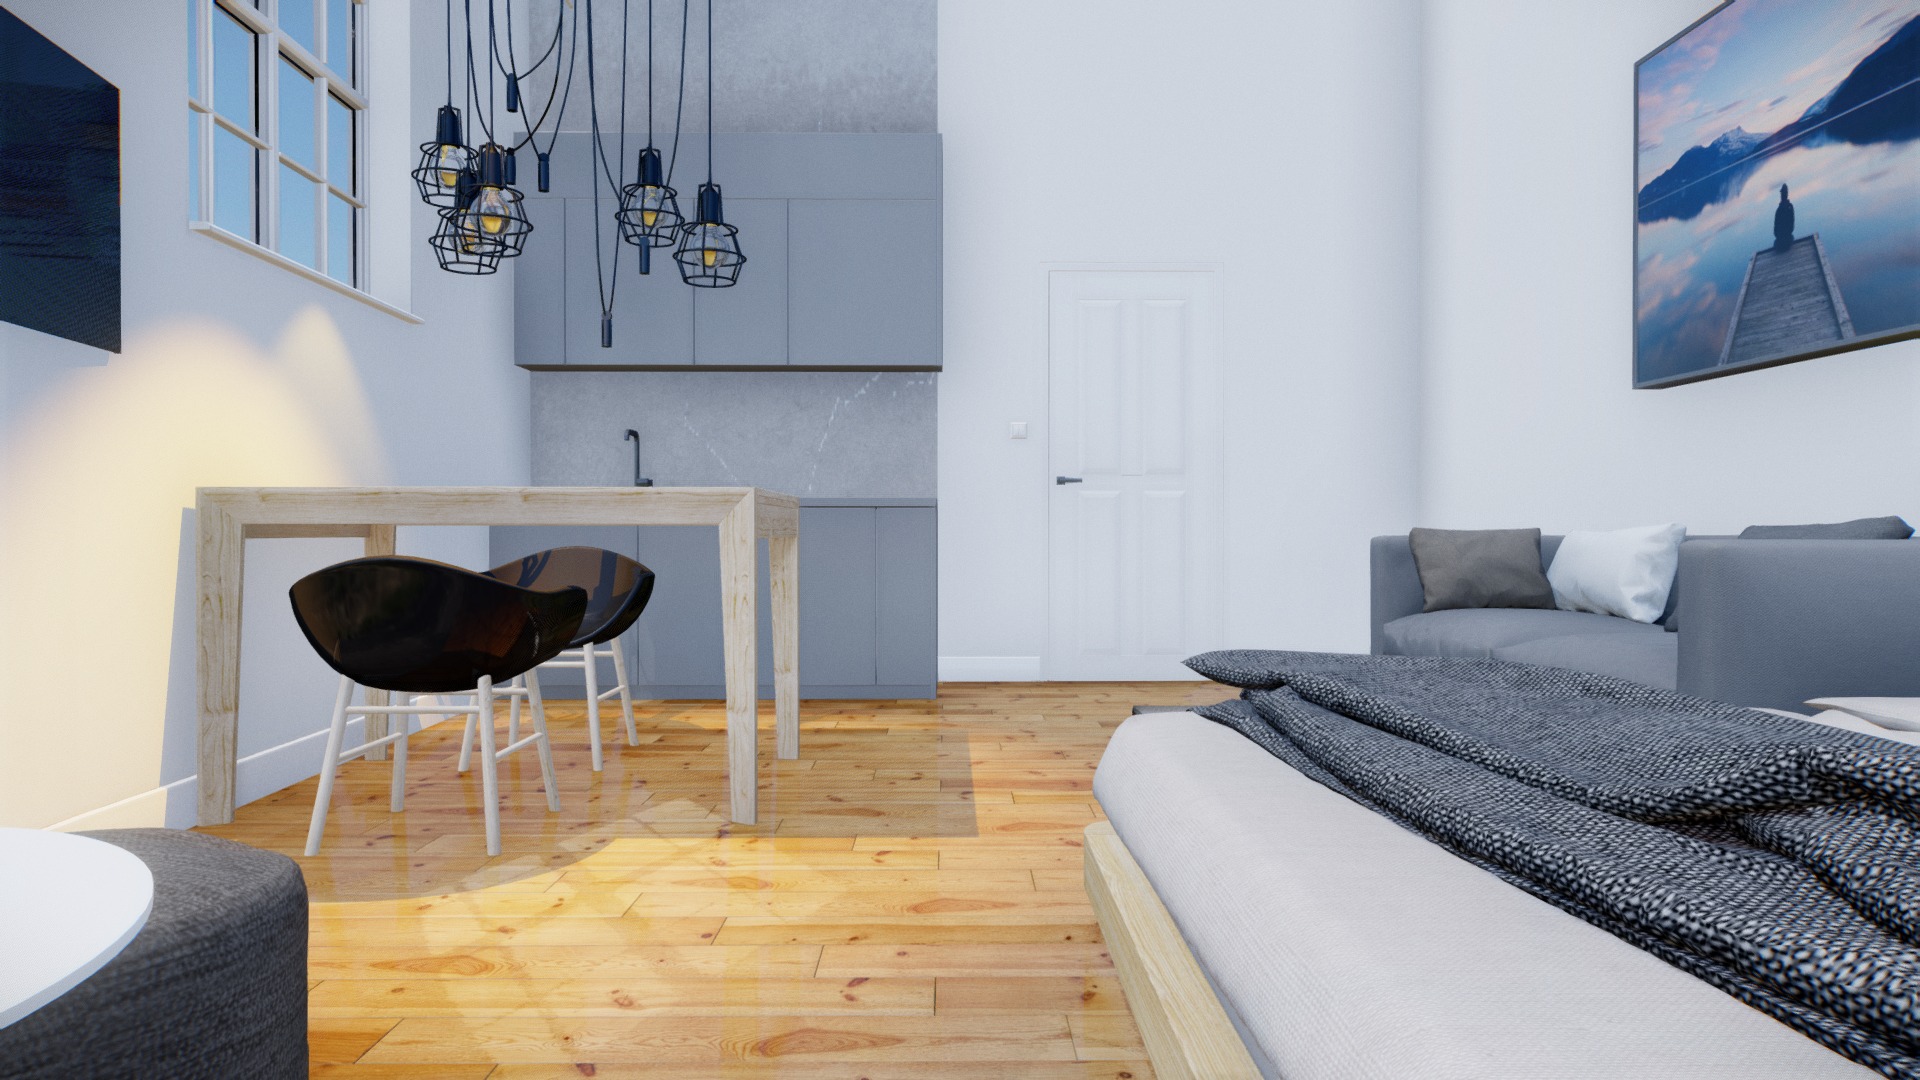 3D model Small Apartment Design VR 2018 - This is a 3D model of the Small Apartment Design VR 2018. The 3D model is about a room with a bed and a table.